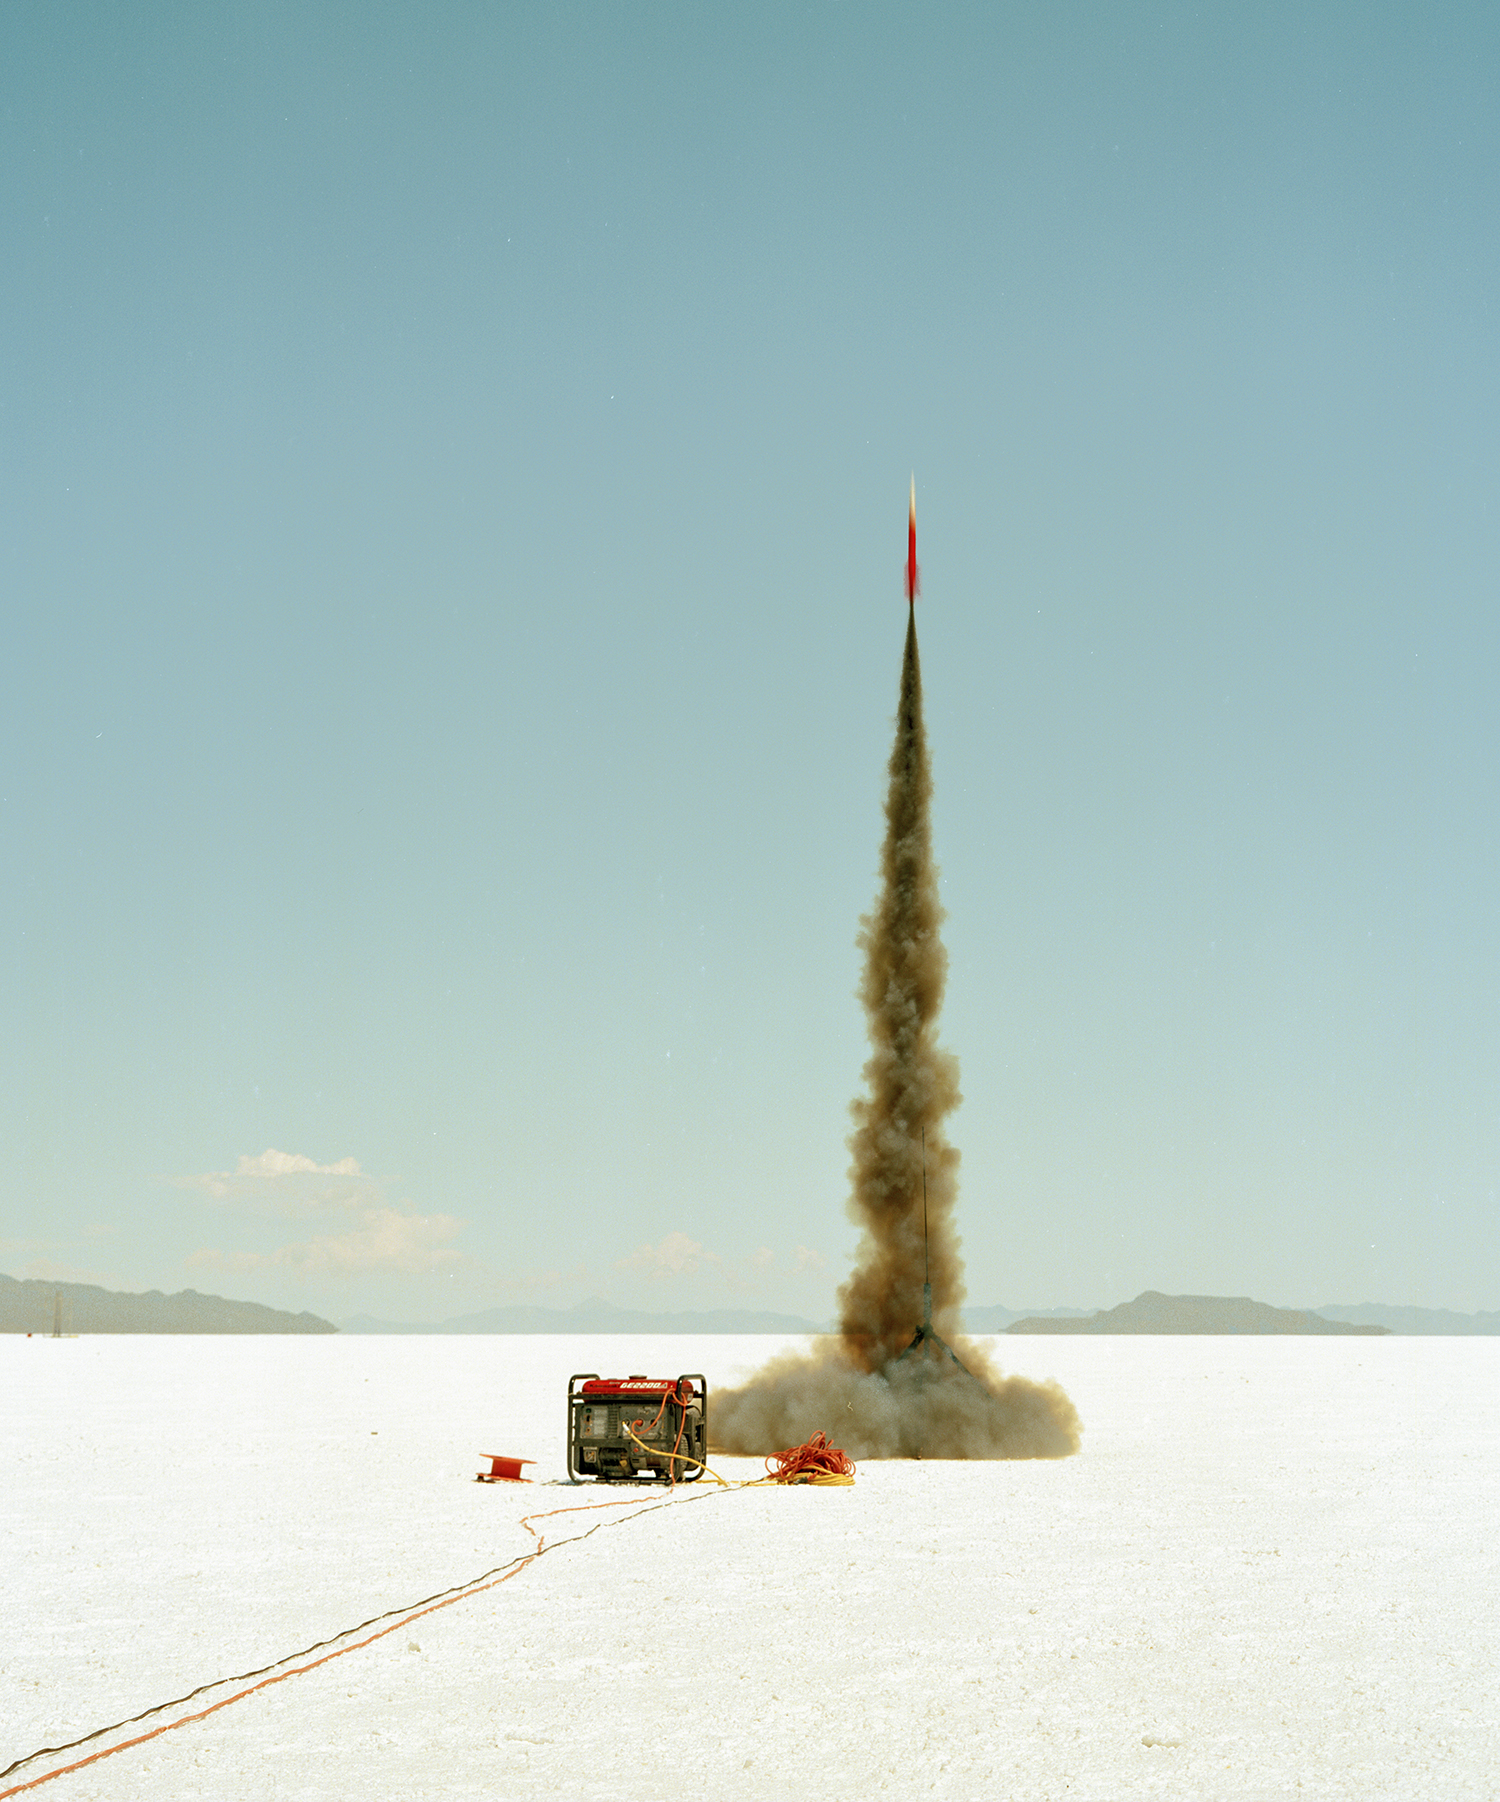 A small rocket launches into air, with a generator nearby, on a salt flat